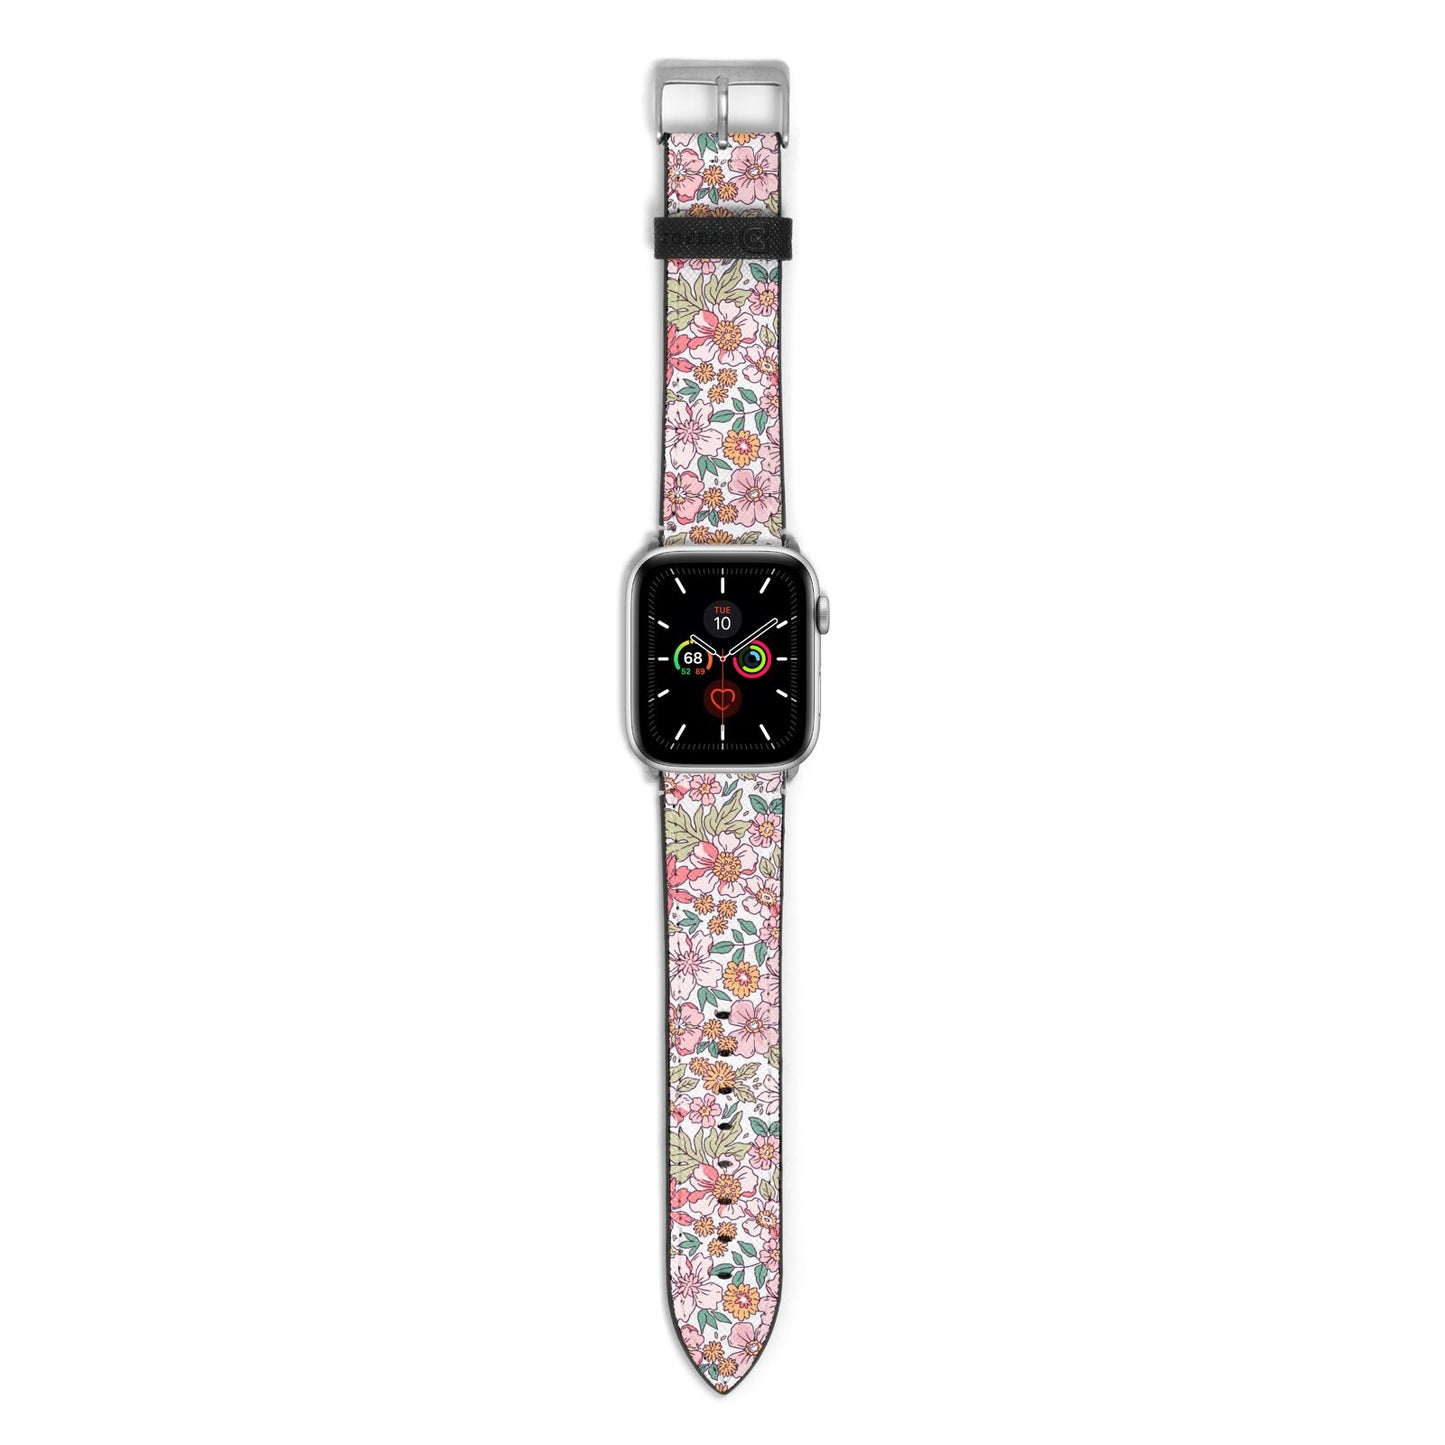 Small Floral Pattern Apple Watch Strap with Silver Hardware